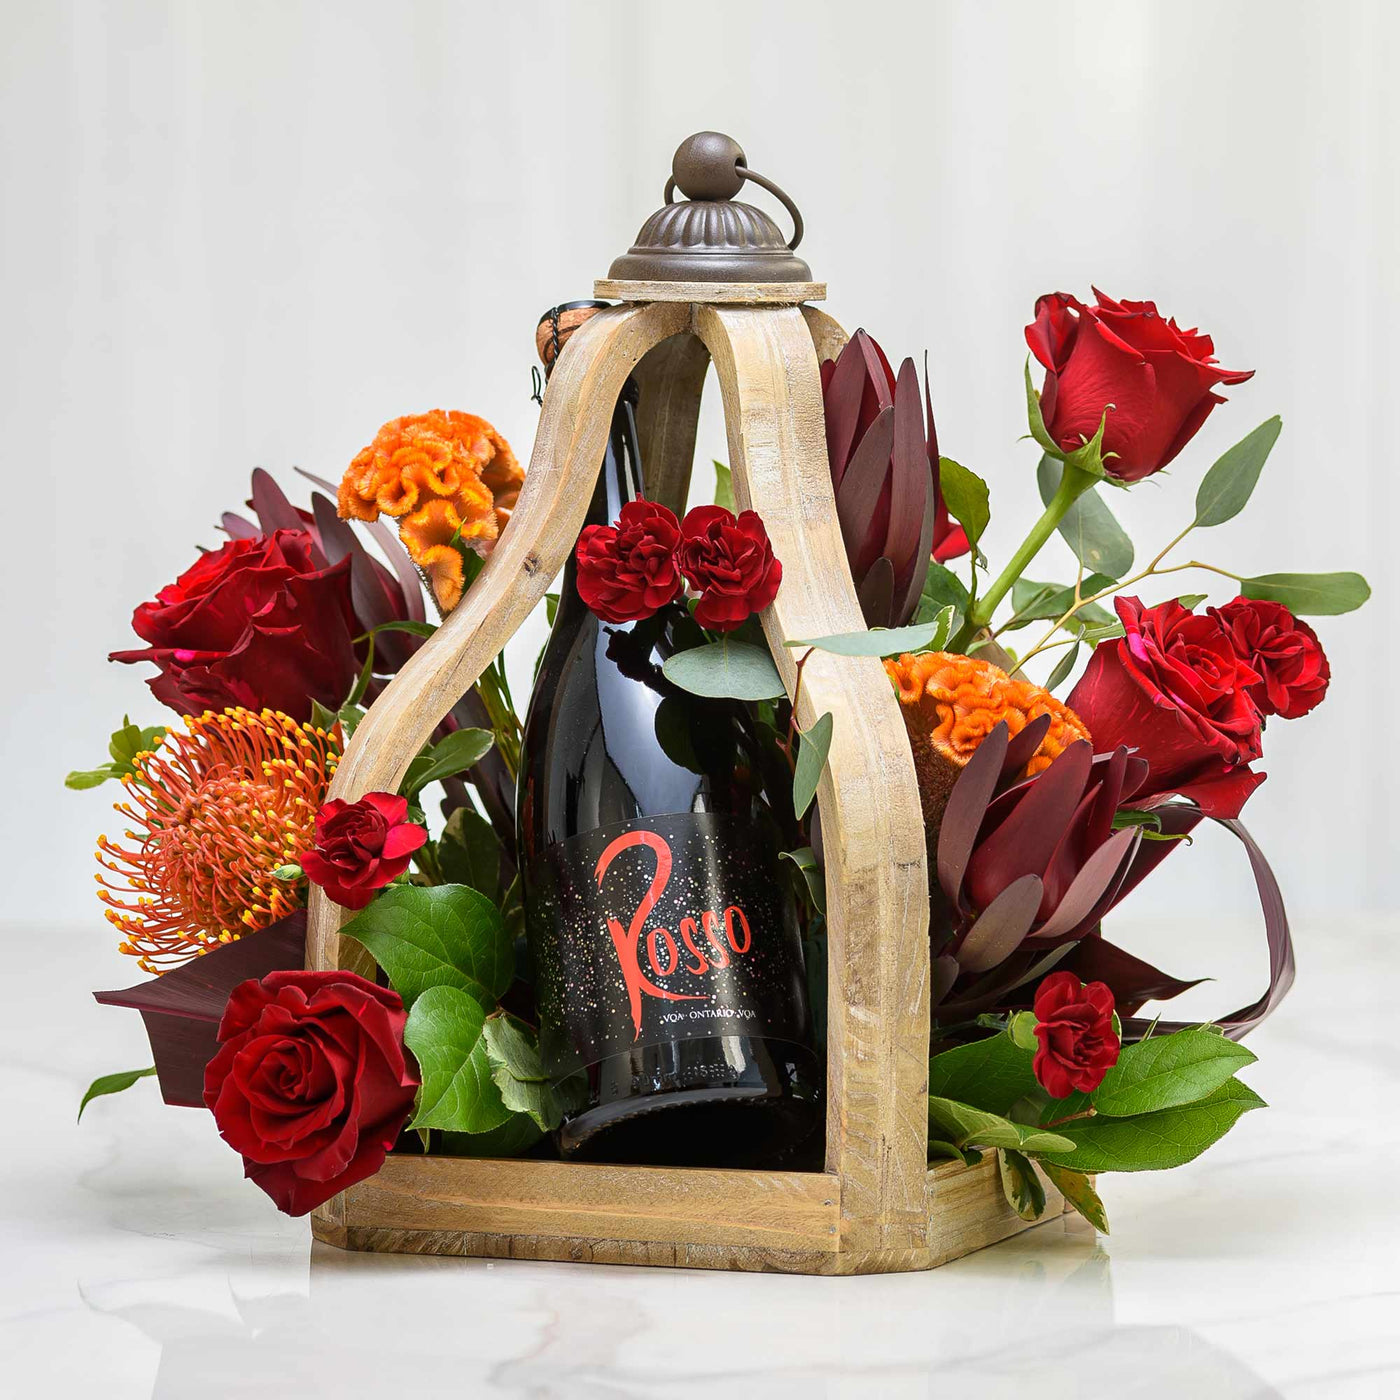 Rosso & Roses Lantern - Small (Includes Flowers)